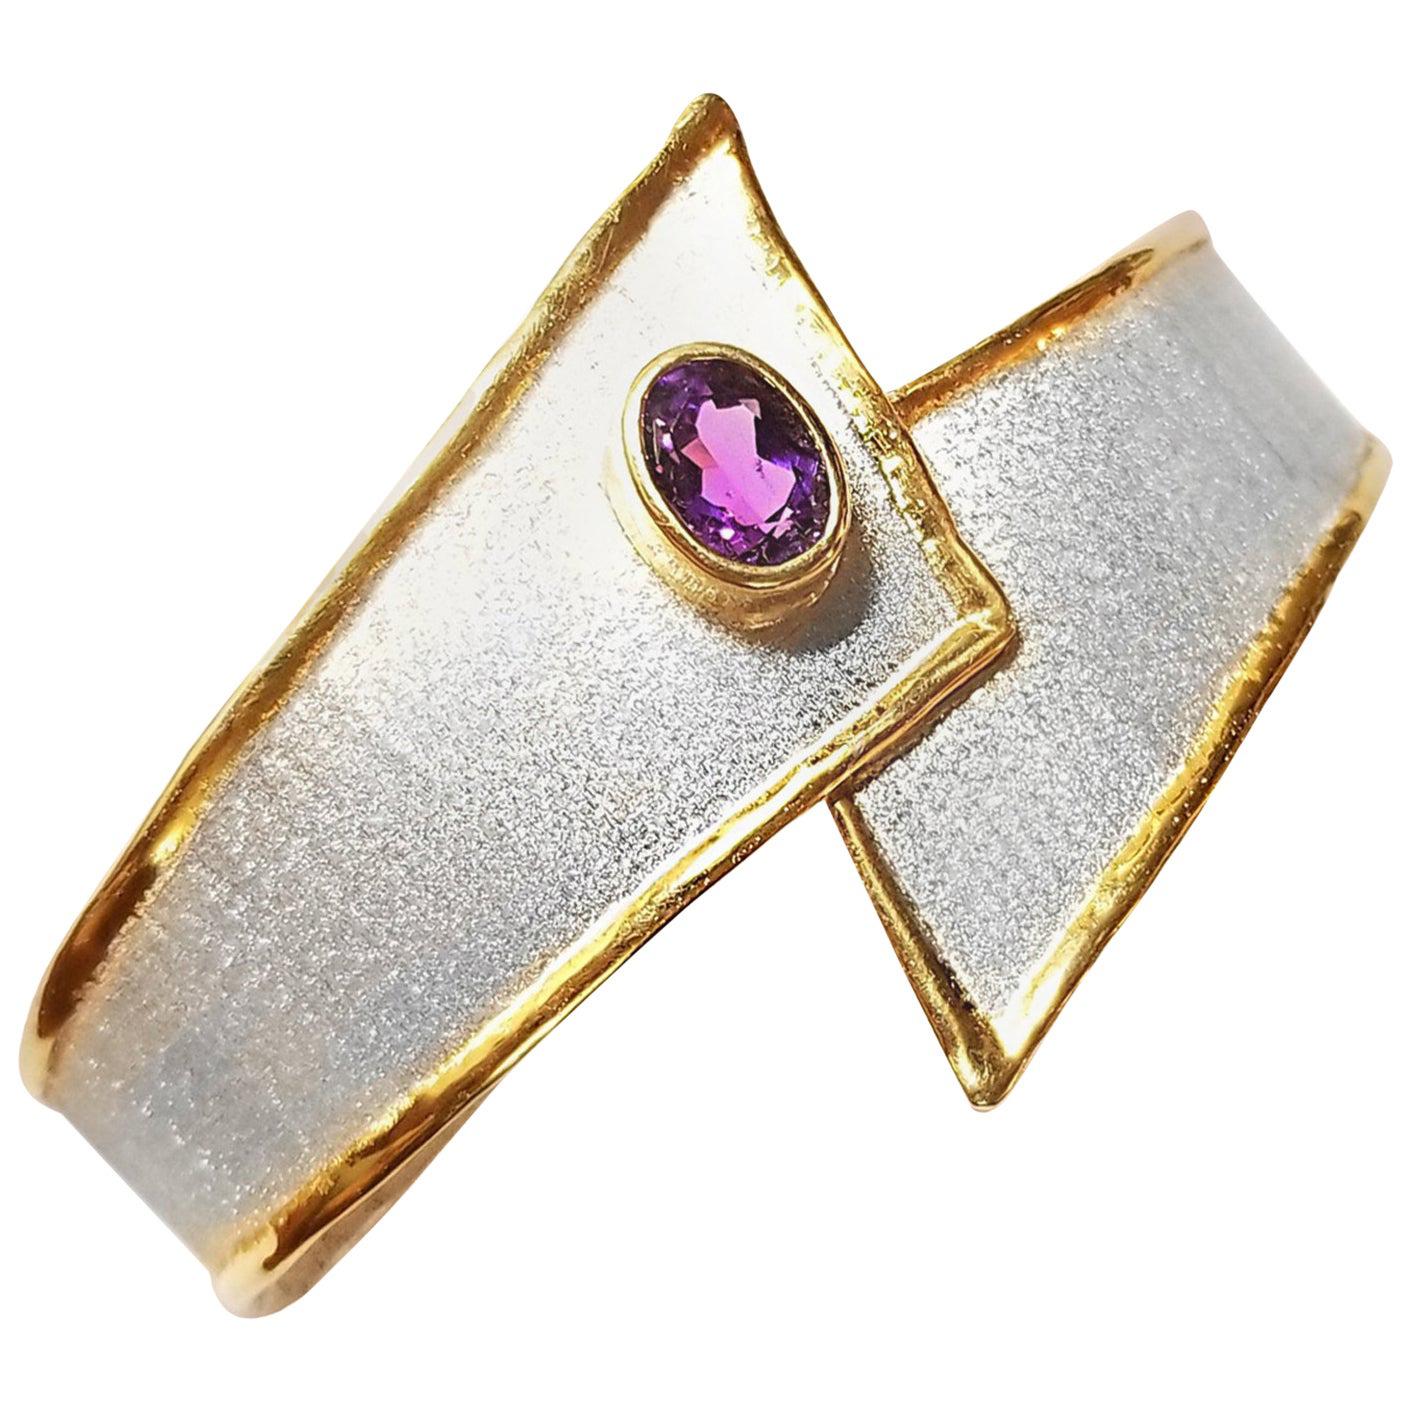 Yianni Creations Fine Silver and Gold 24 Karat Edges Two-Tone with Amethyst For Sale